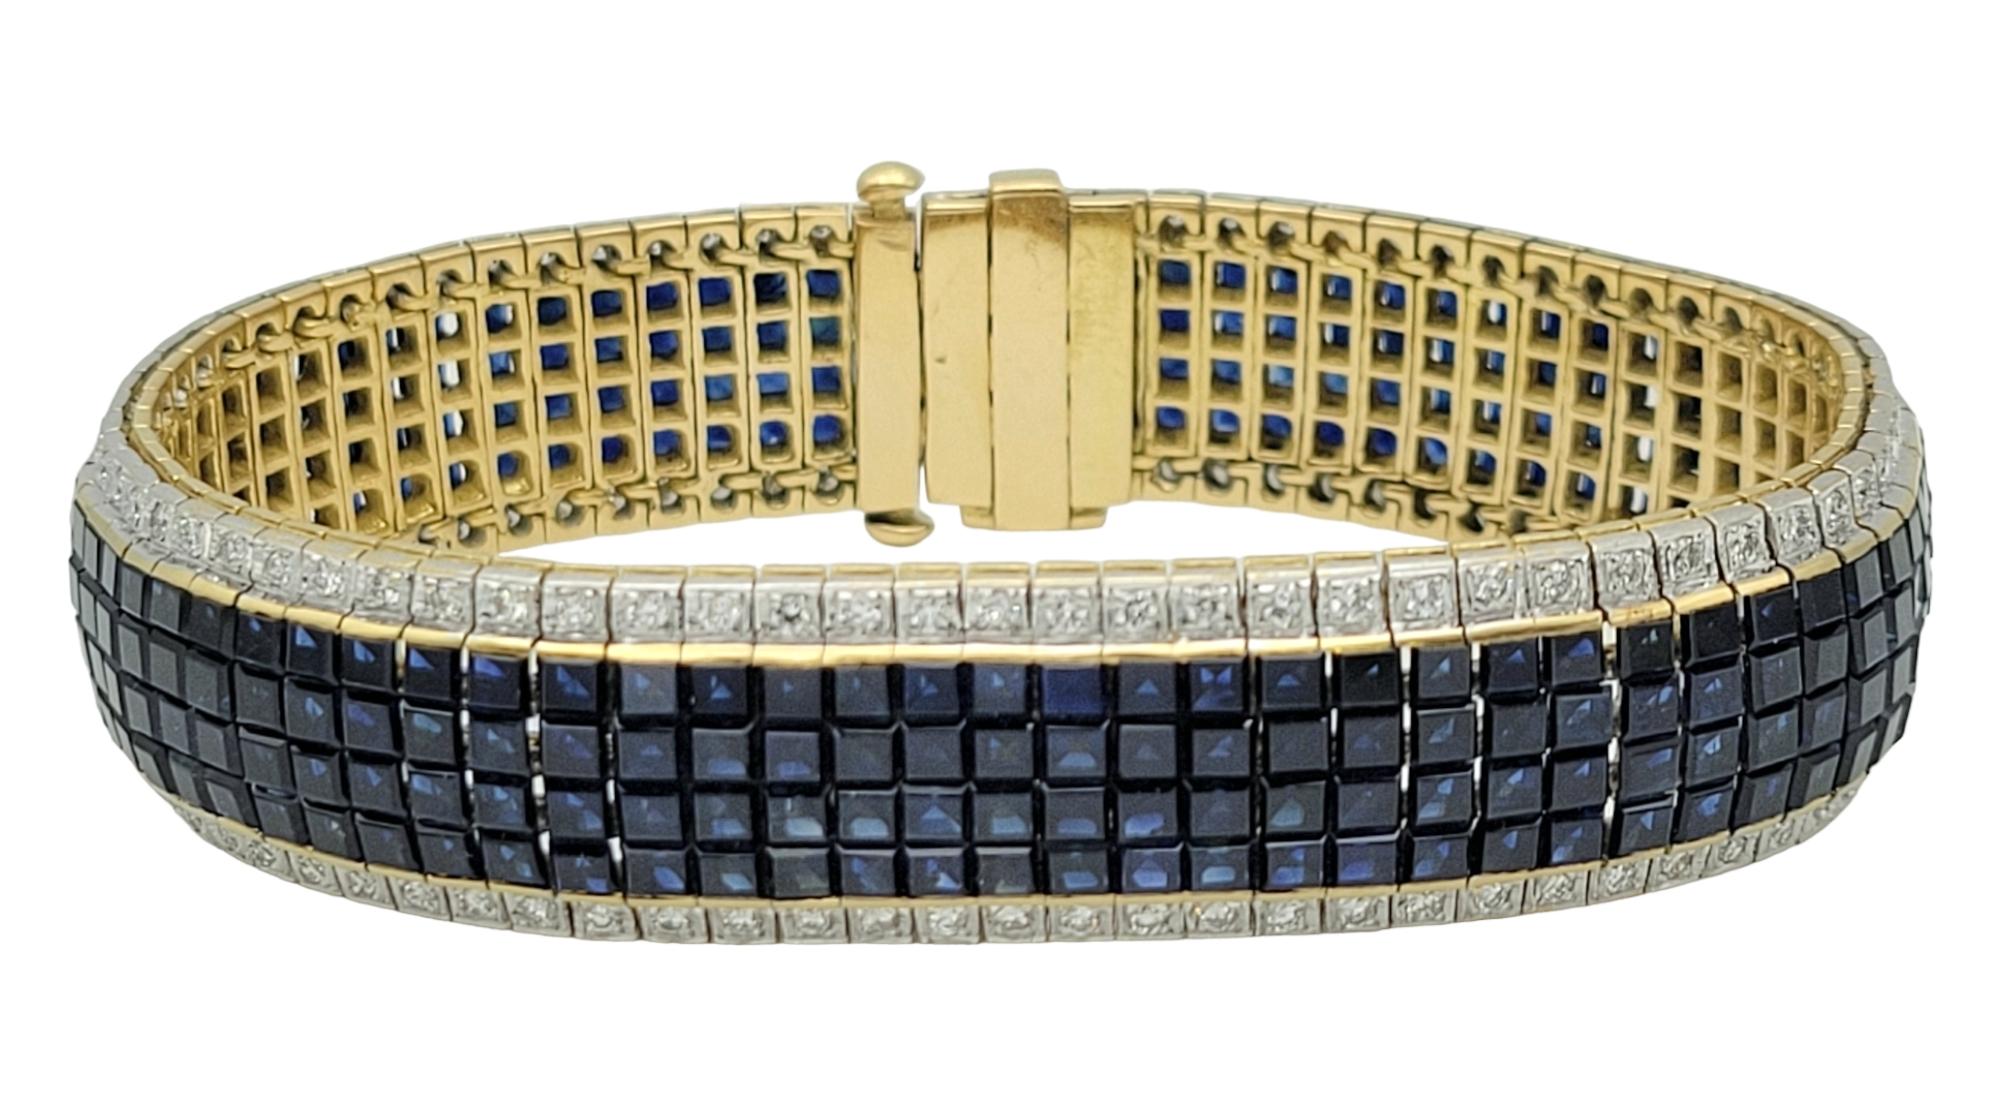 Wrap your wrist in sheer luxury with this stunning sapphire and diamond bracelet. This spectacular piece combines the sparkle of diamonds and the rich hue of natural sapphires for an elegant, luxurious look that will not go unnoticed. 

This